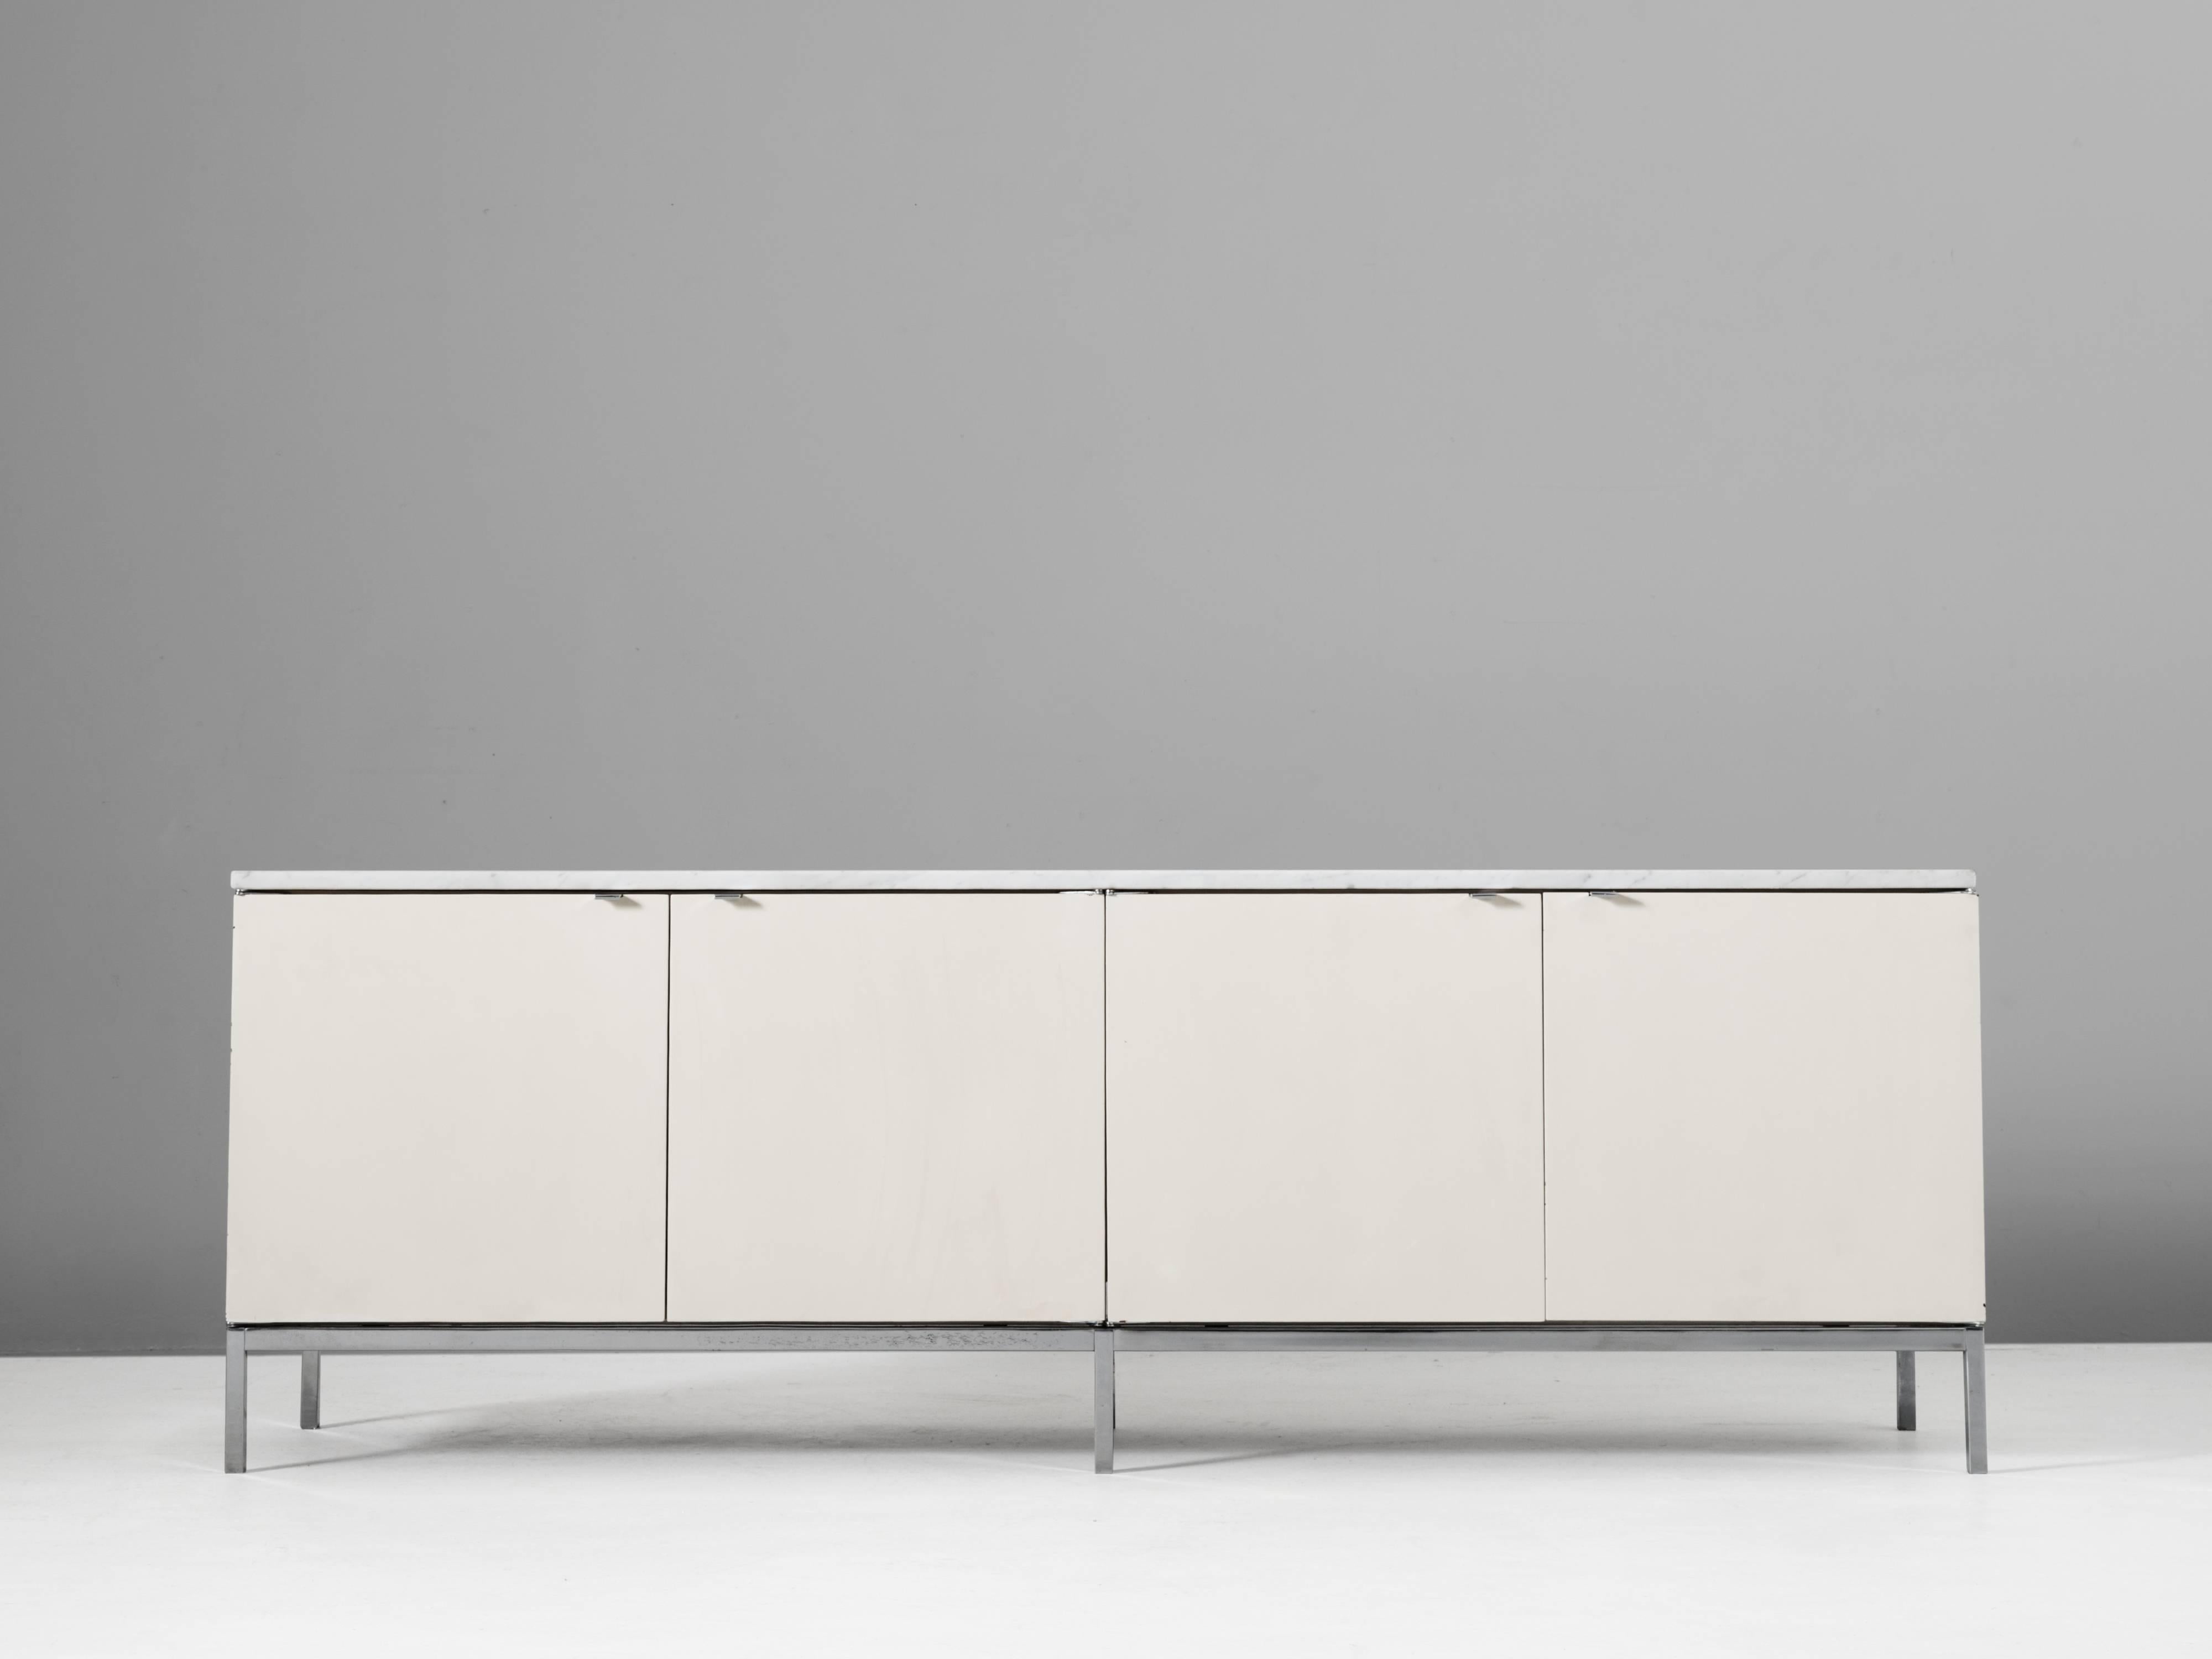 Sideboards in oak metal and marble by Florence Knoll for Knoll International, United States, 1960s. 

Freestanding minimalistic credenza with elegant details such as the chromed base and marble top. Equipped with smart storage facilities. This